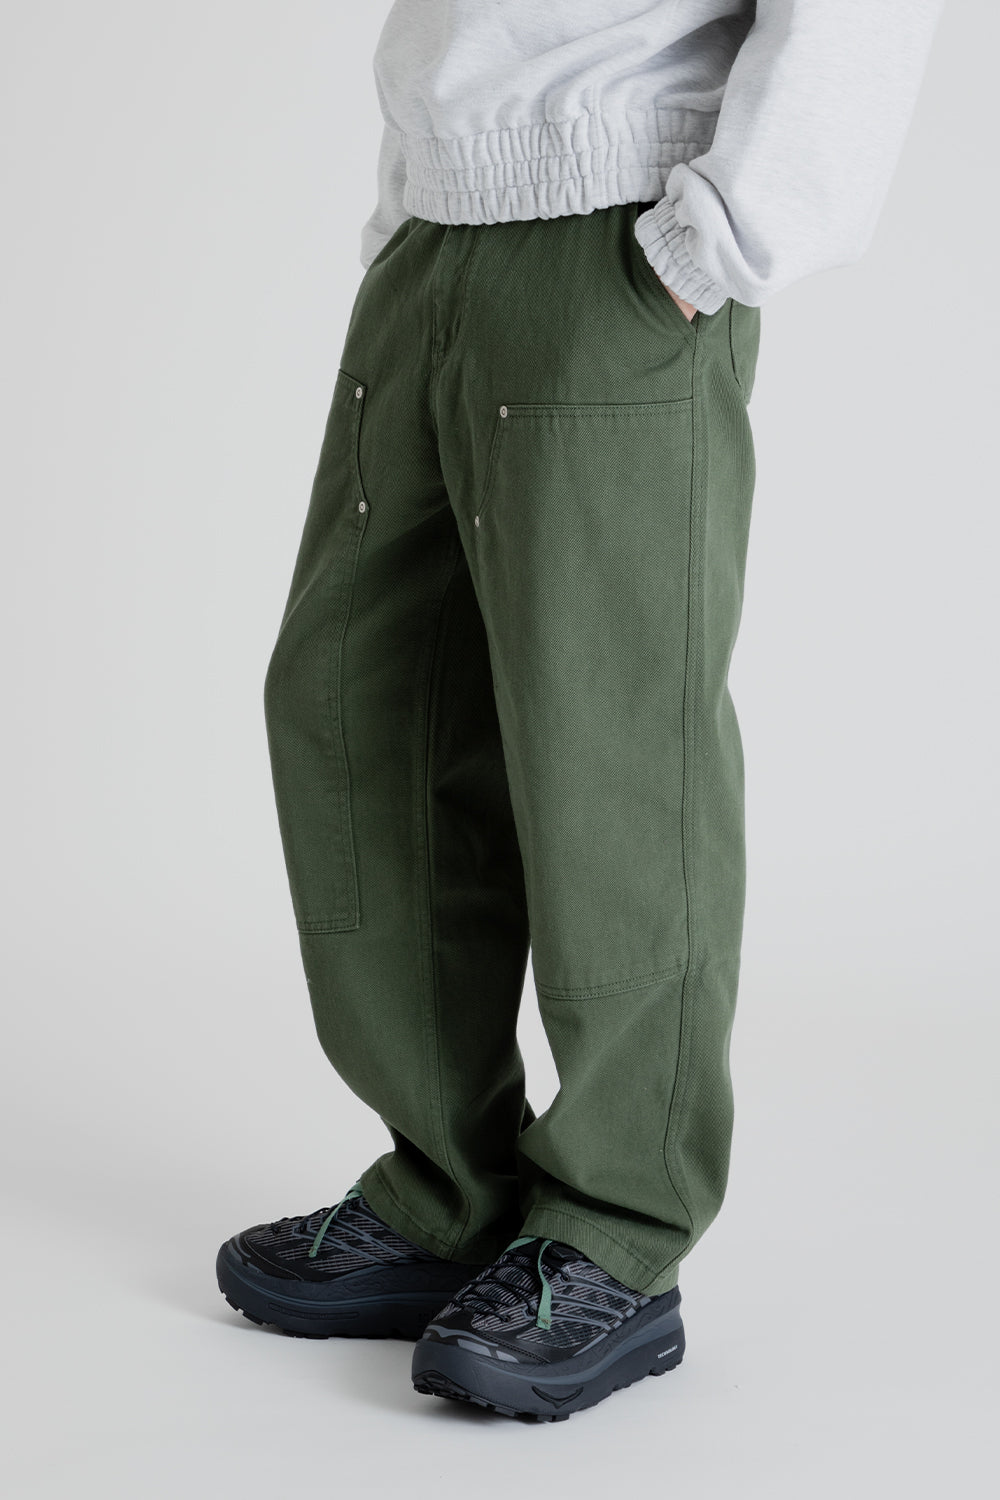 Frizmworks 7S Cotton Double Knee Pants in Olive